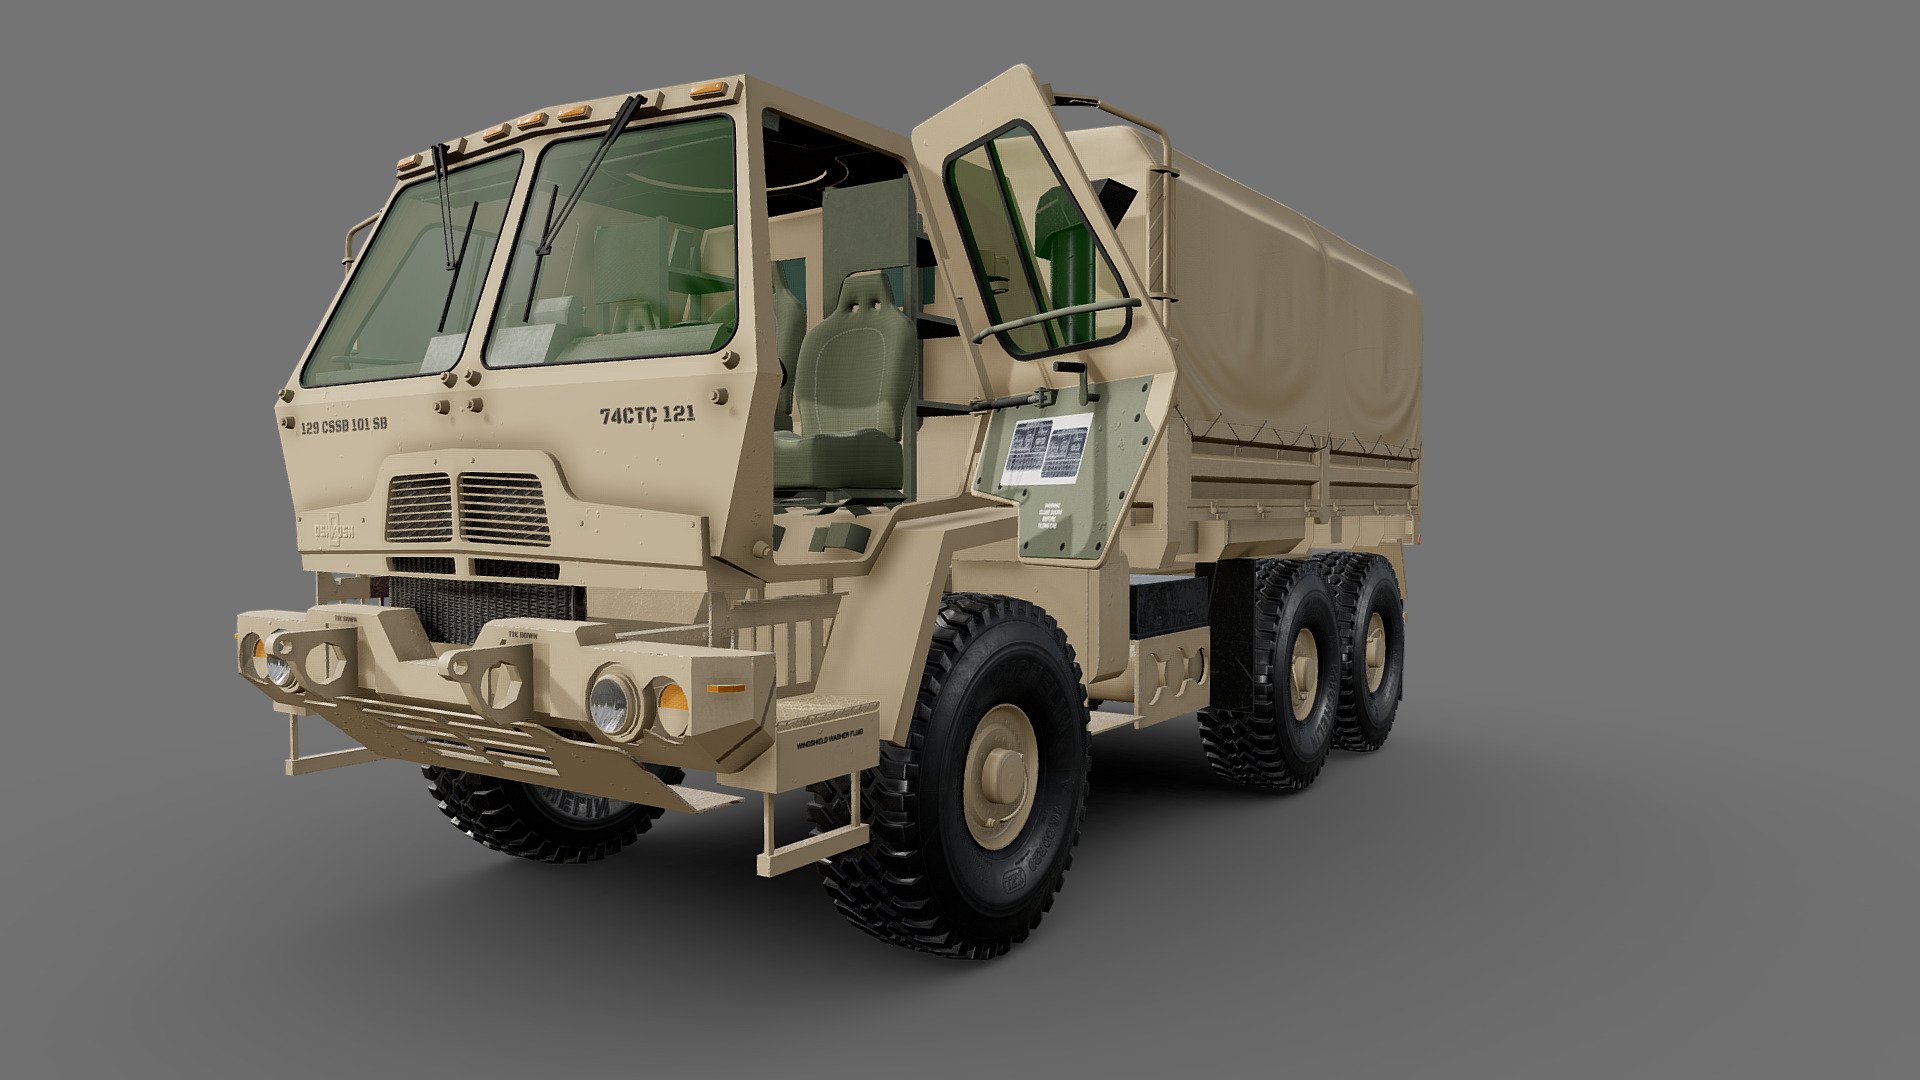 M1083 FMTV 6x6 General utility truck

This version of the M1083 FMTV comes with a 3D modeled and textured cabin




File format: Blend FBX OBJ

Materials/Textures: PBR textures in substance painter

Material Maps: Base color, Roughness, Metallic, Normal

Texture resolution: 4k textures

Polycount:




bjects: 73

Vertices: 60.871

Edges: 110.333

Faces: 51.488

Triangles: 102.303
 - M1083 FMTV 6x6 General utility truck - Buy Royalty Free 3D model by luisbcompany 3d model